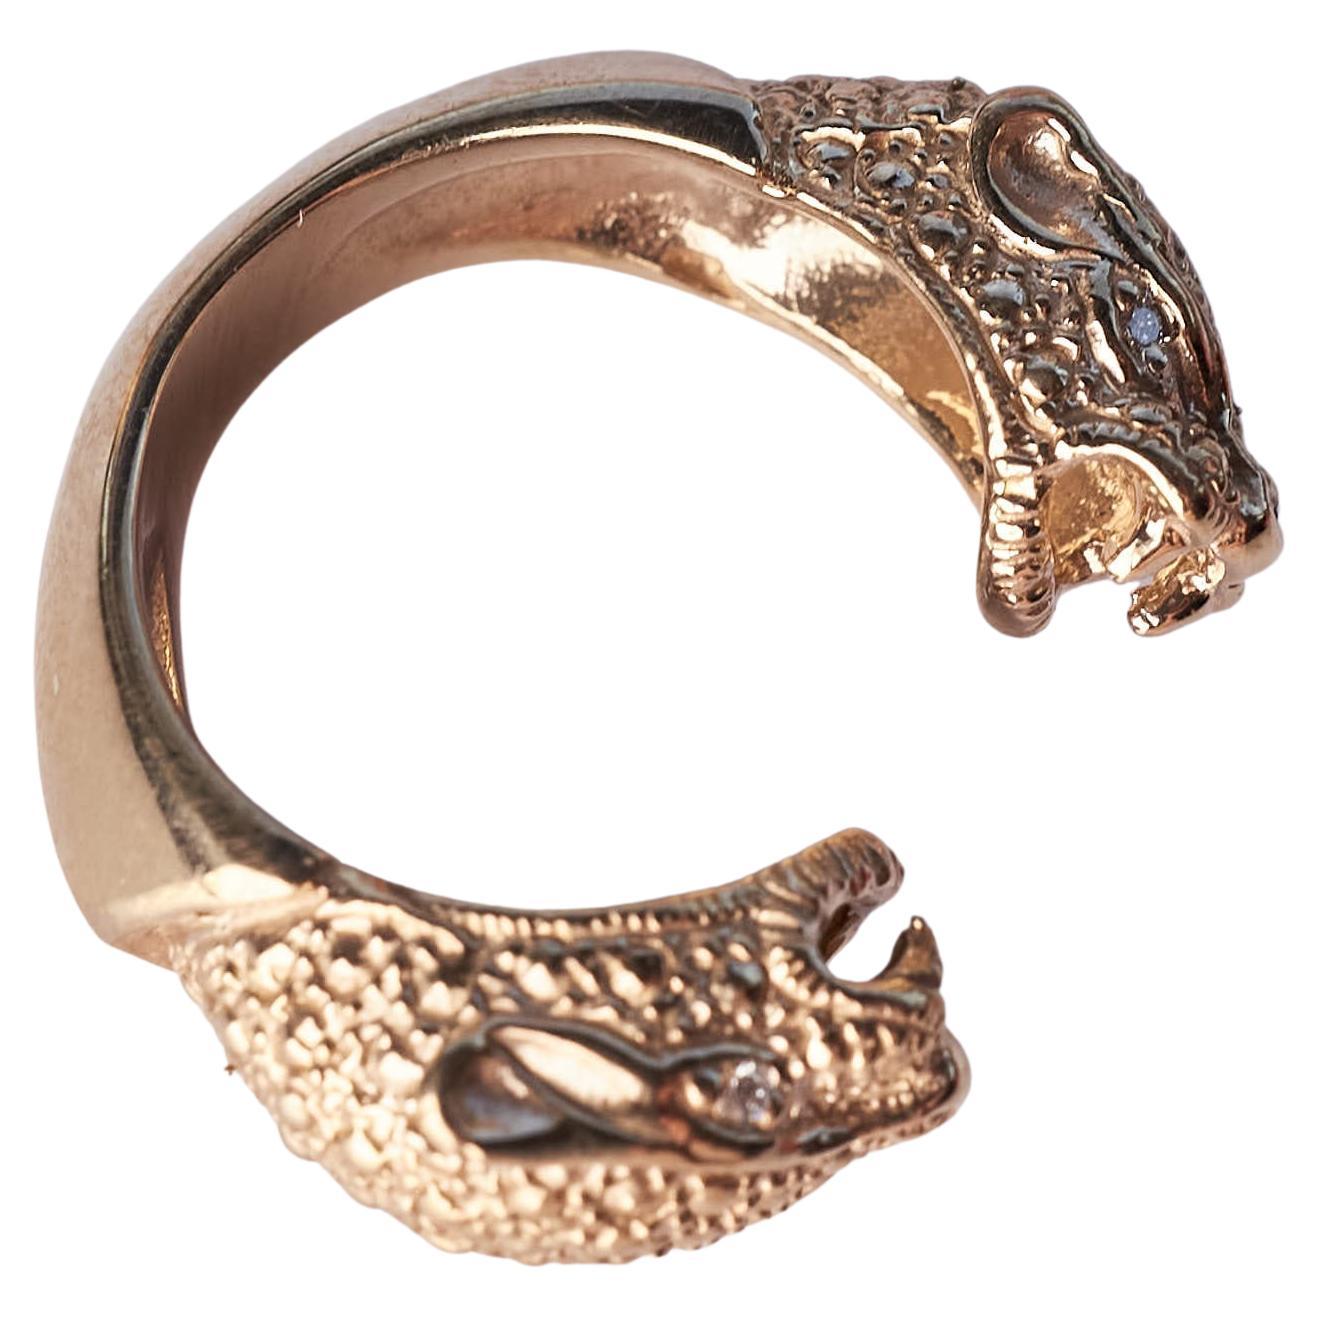 White Diamond Double Head Jaguar Ring Gold Animal Cocktail Ring J Dauphin For Sale